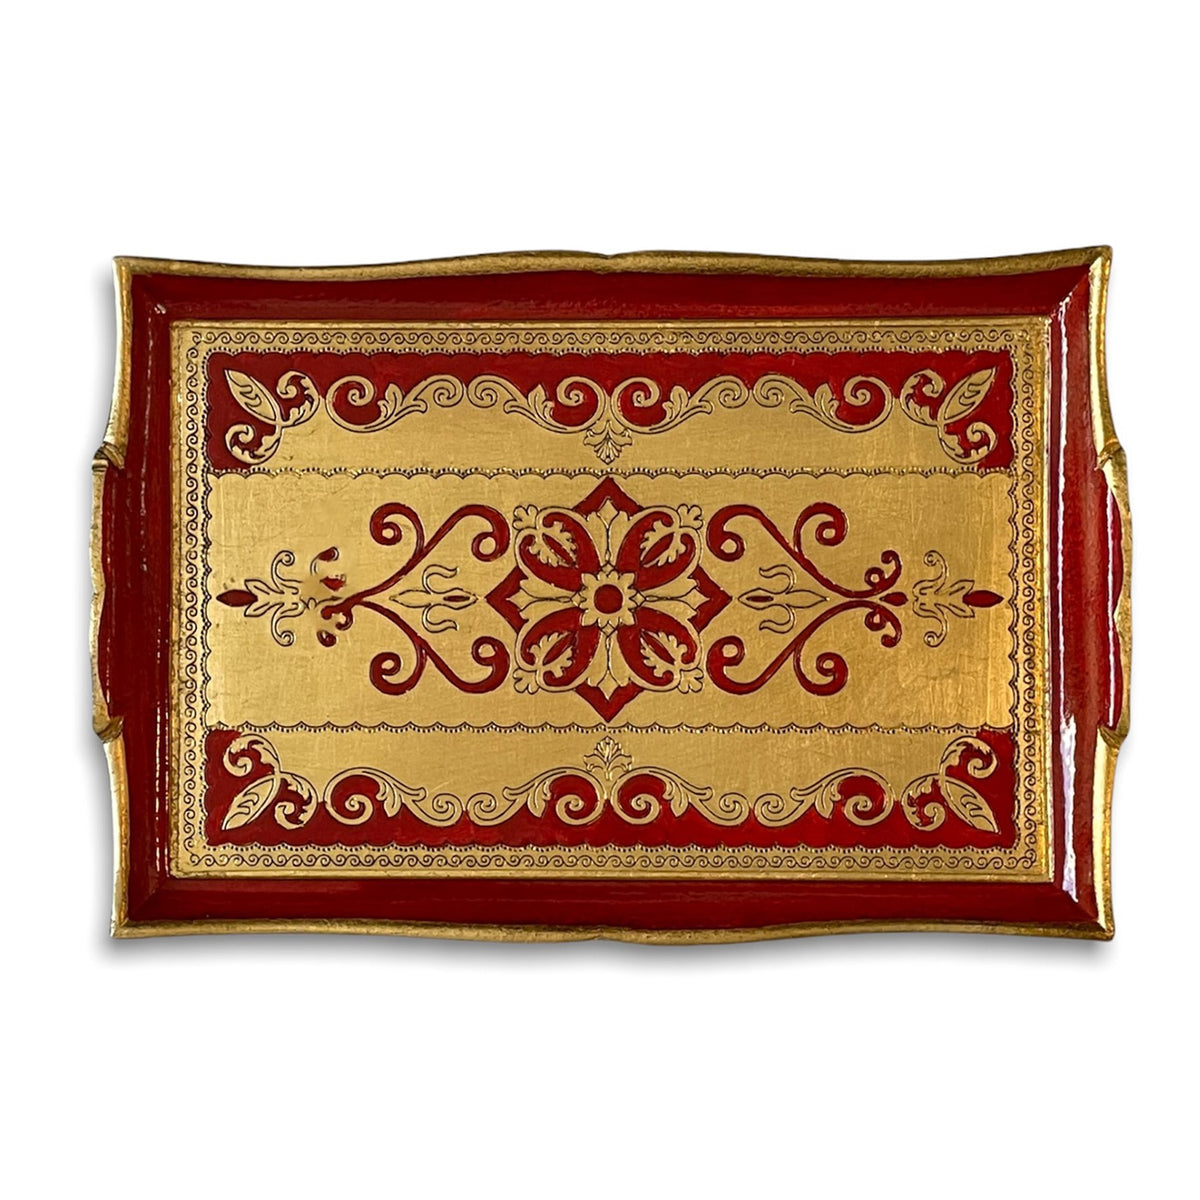 Florentine Serving Tray - Gold and Red